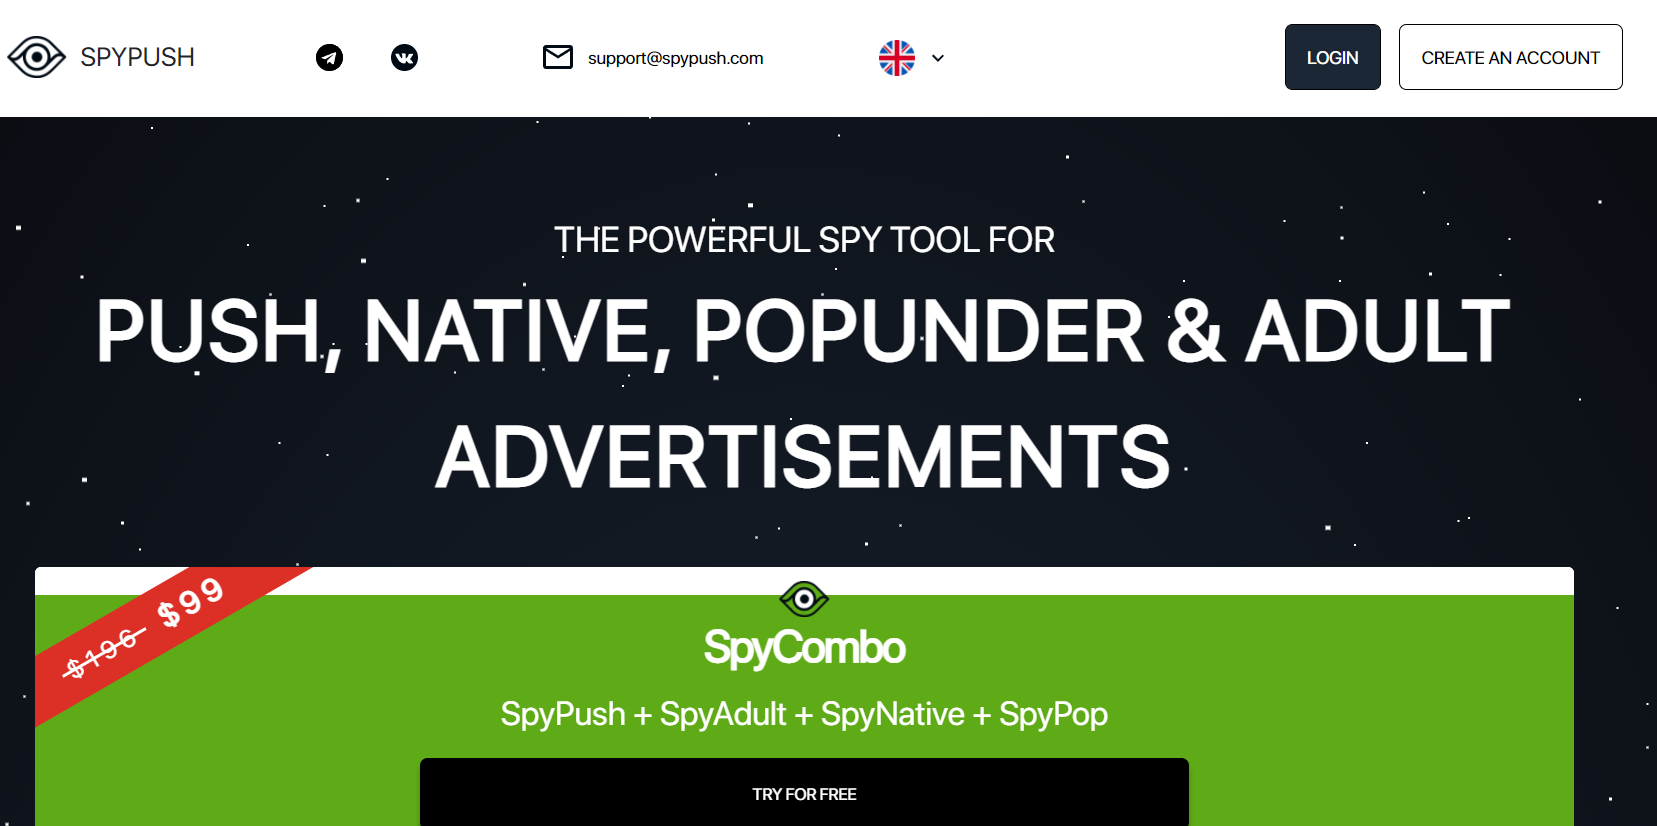 Top 15 Spy Tools For your Campaigns